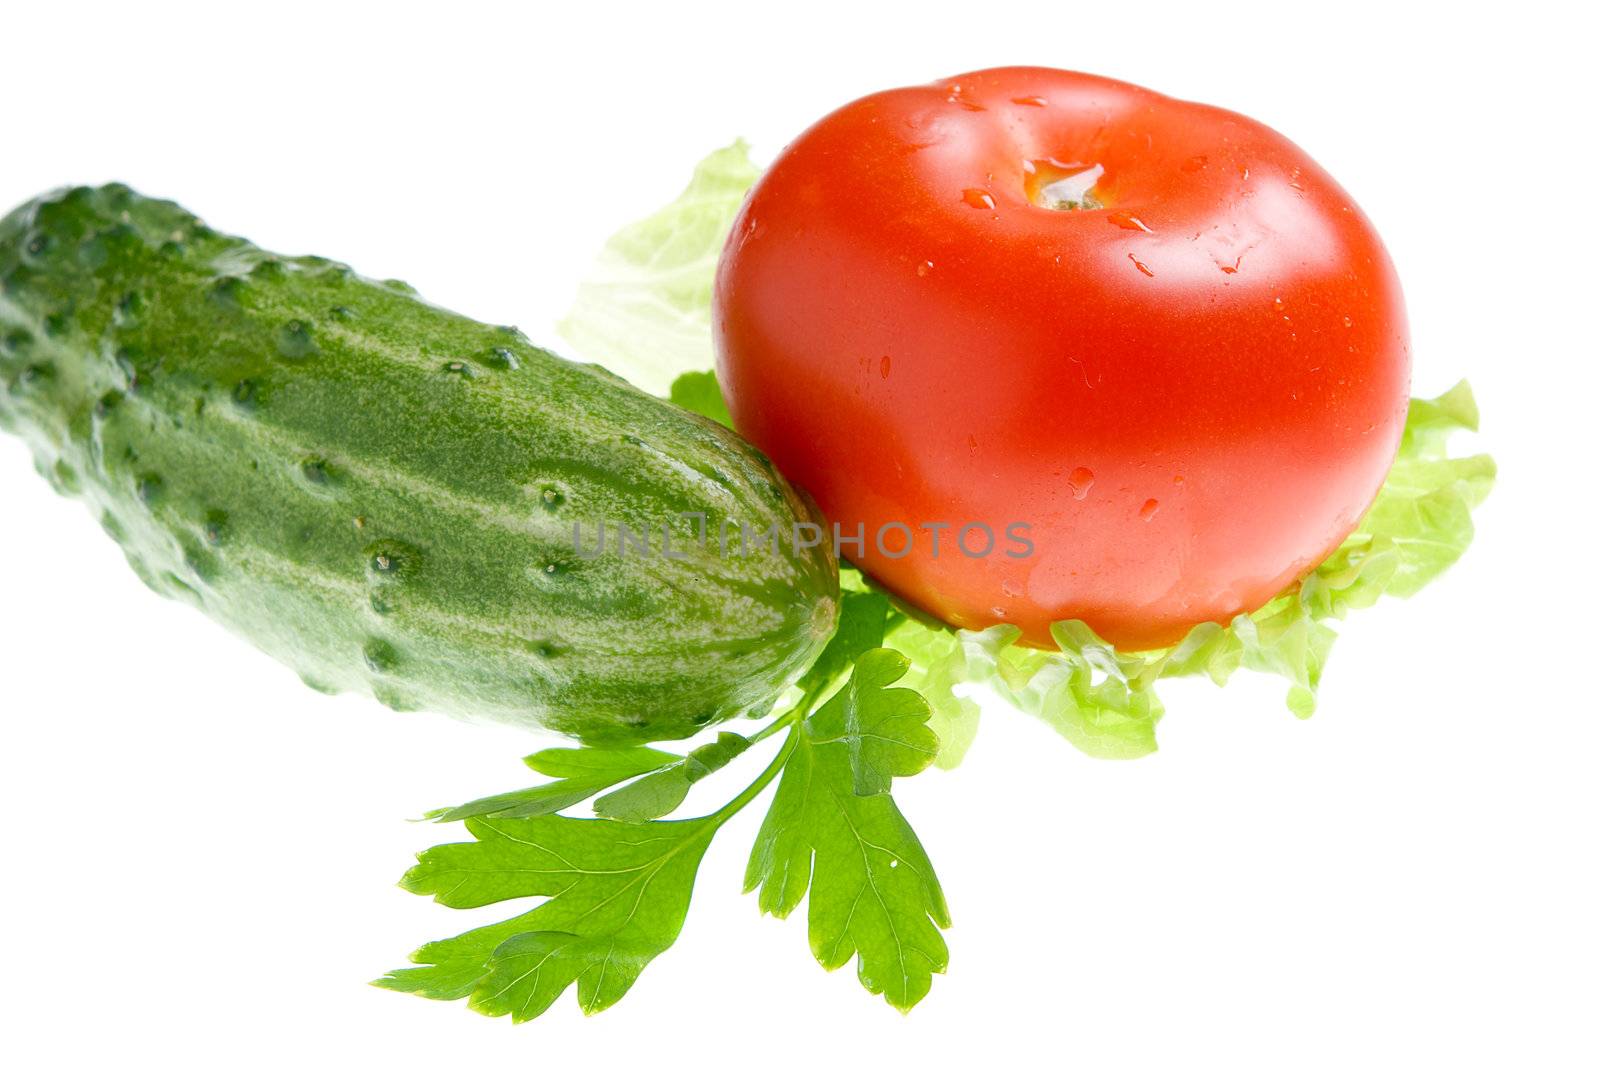 Spring vegetables. A tomato, a cucumber, salad. Useful vitamins